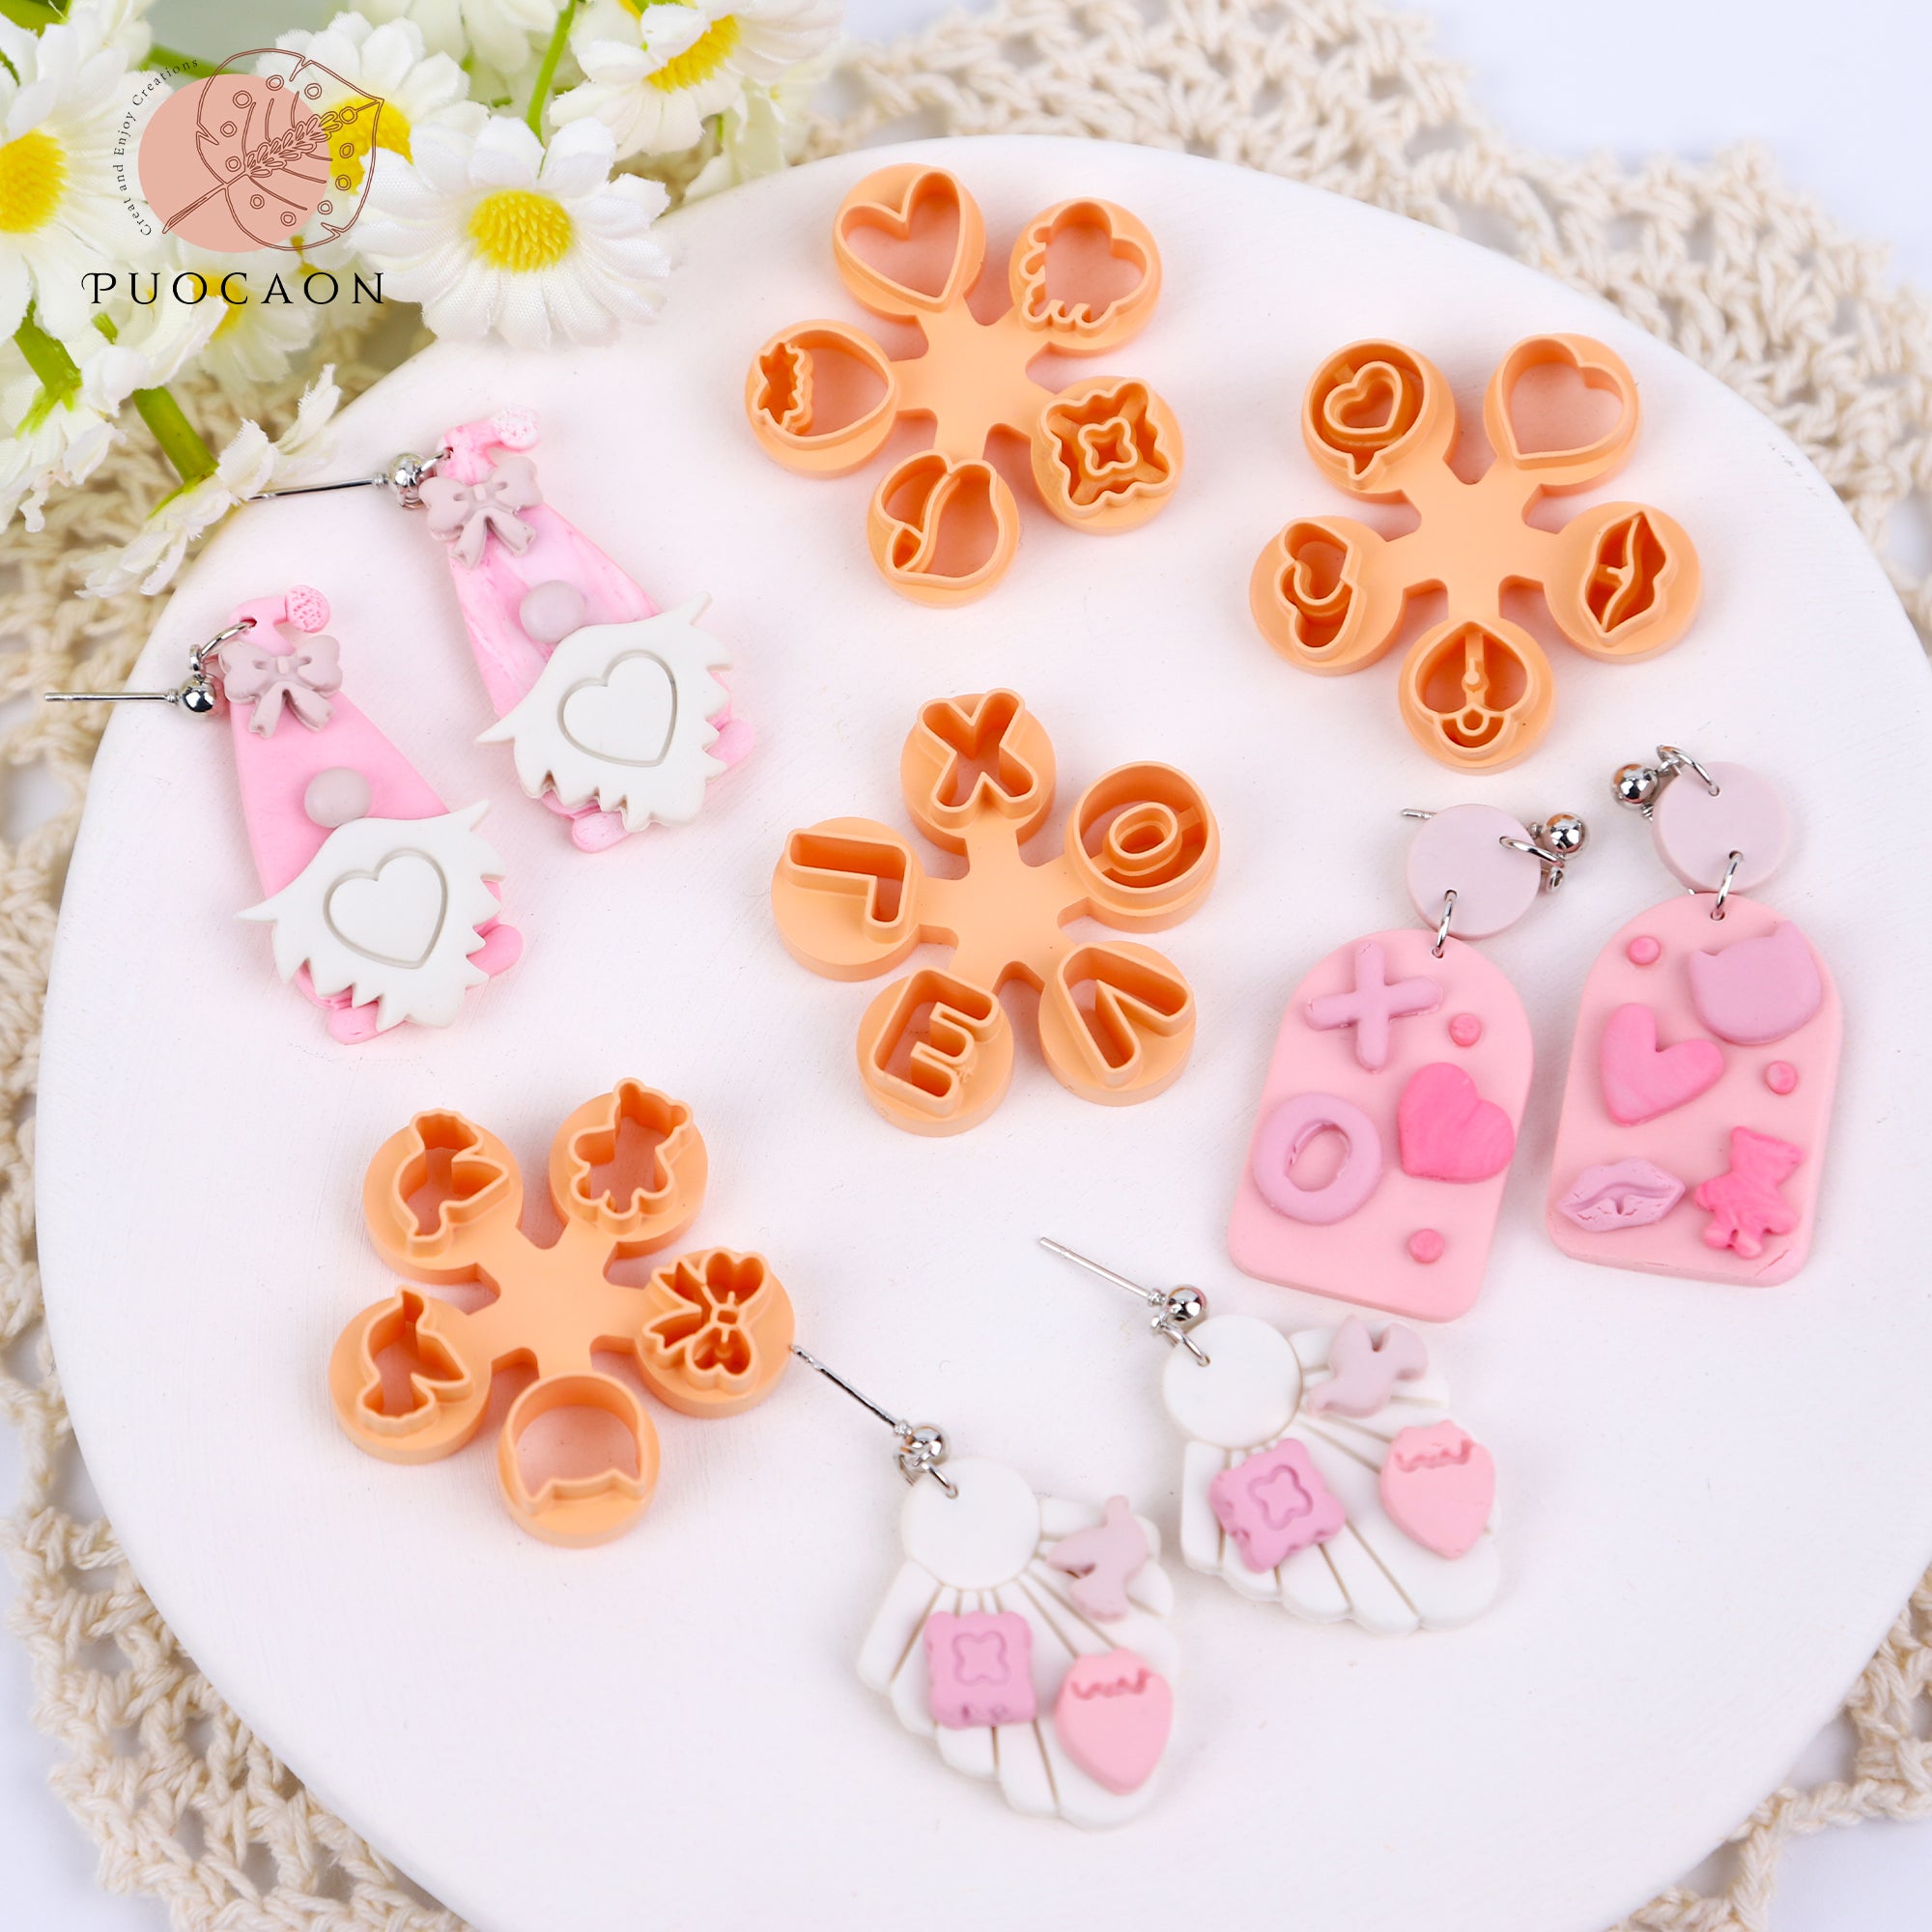 Puocaon Valentines Mini Clay Cutters